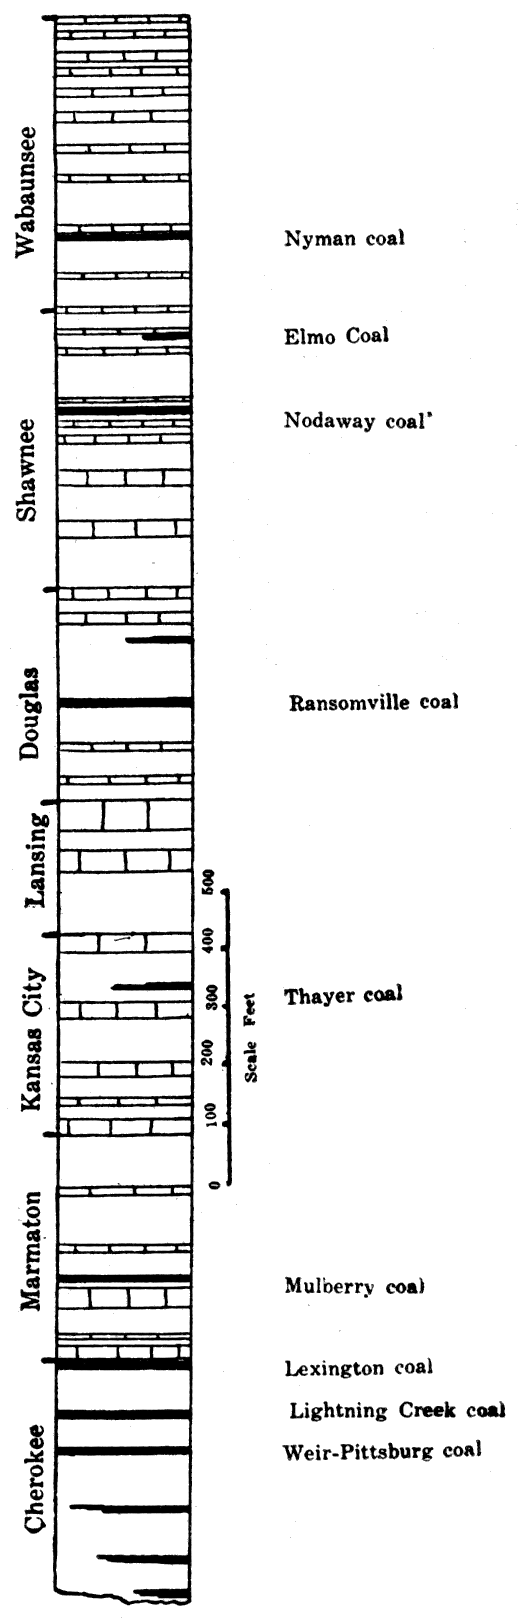 Generalized section of the Pennsylvanian rocks of Kansas showing position of main coal beds.